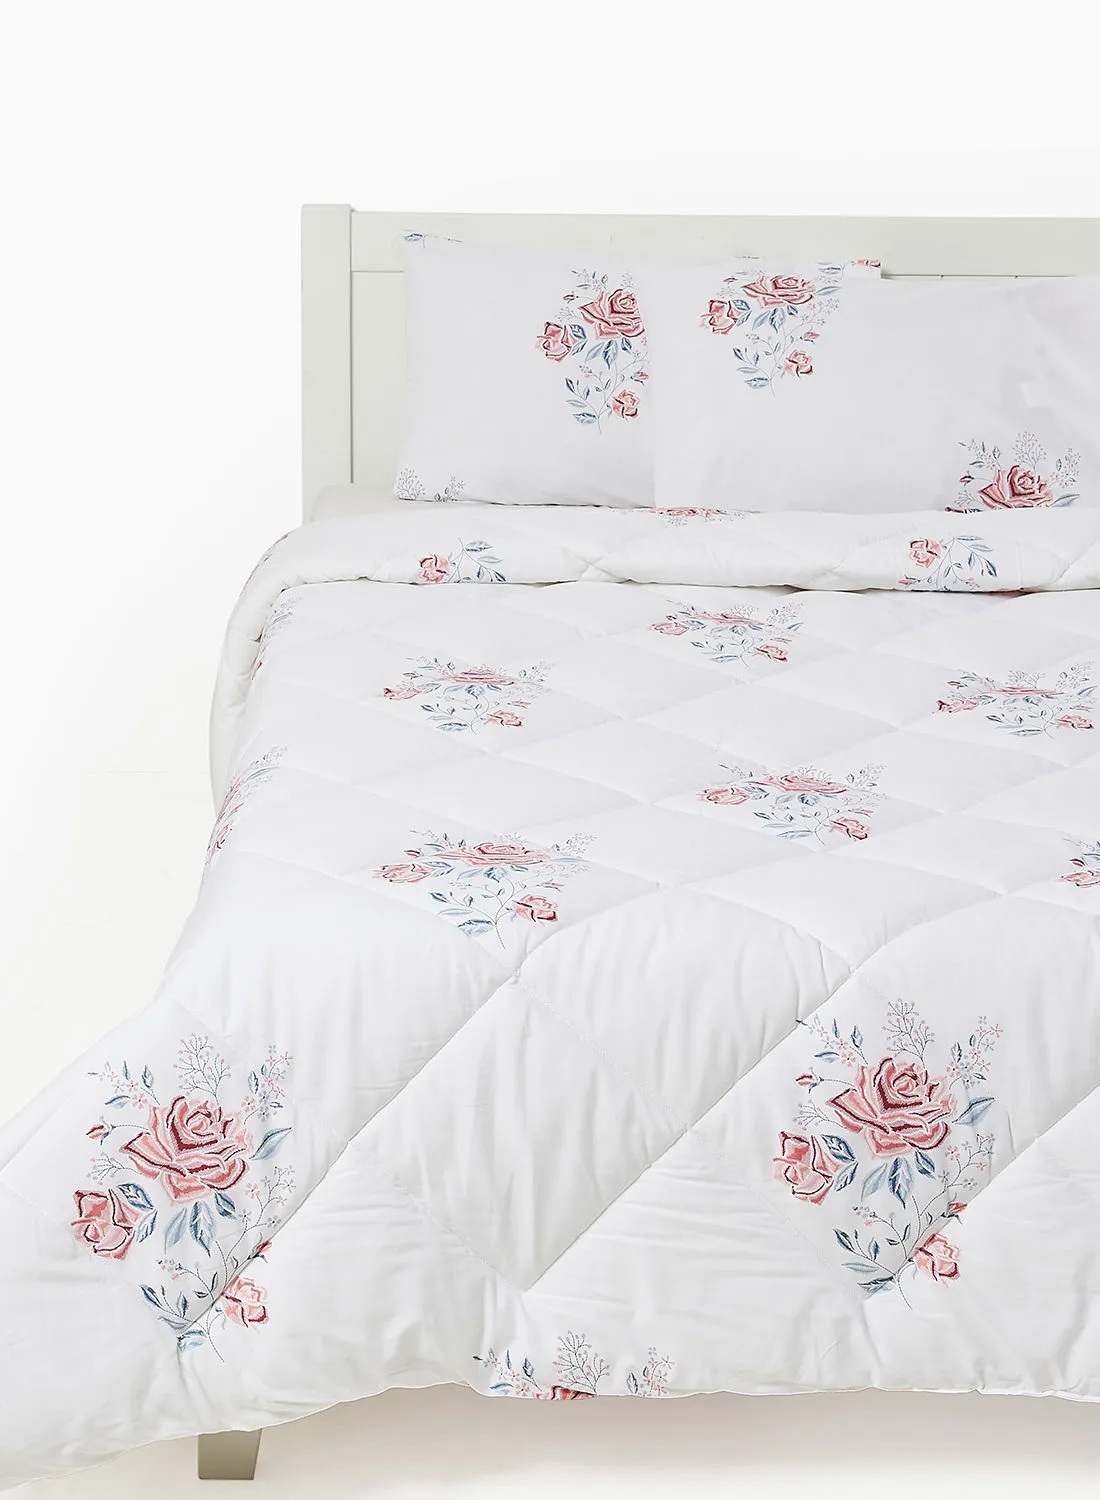 Amal Comforter Set King Size All Season Everyday Use Bedding Set 100% Cotton 3 Pieces 1 Comforter 2 Pillow Covers  Rose